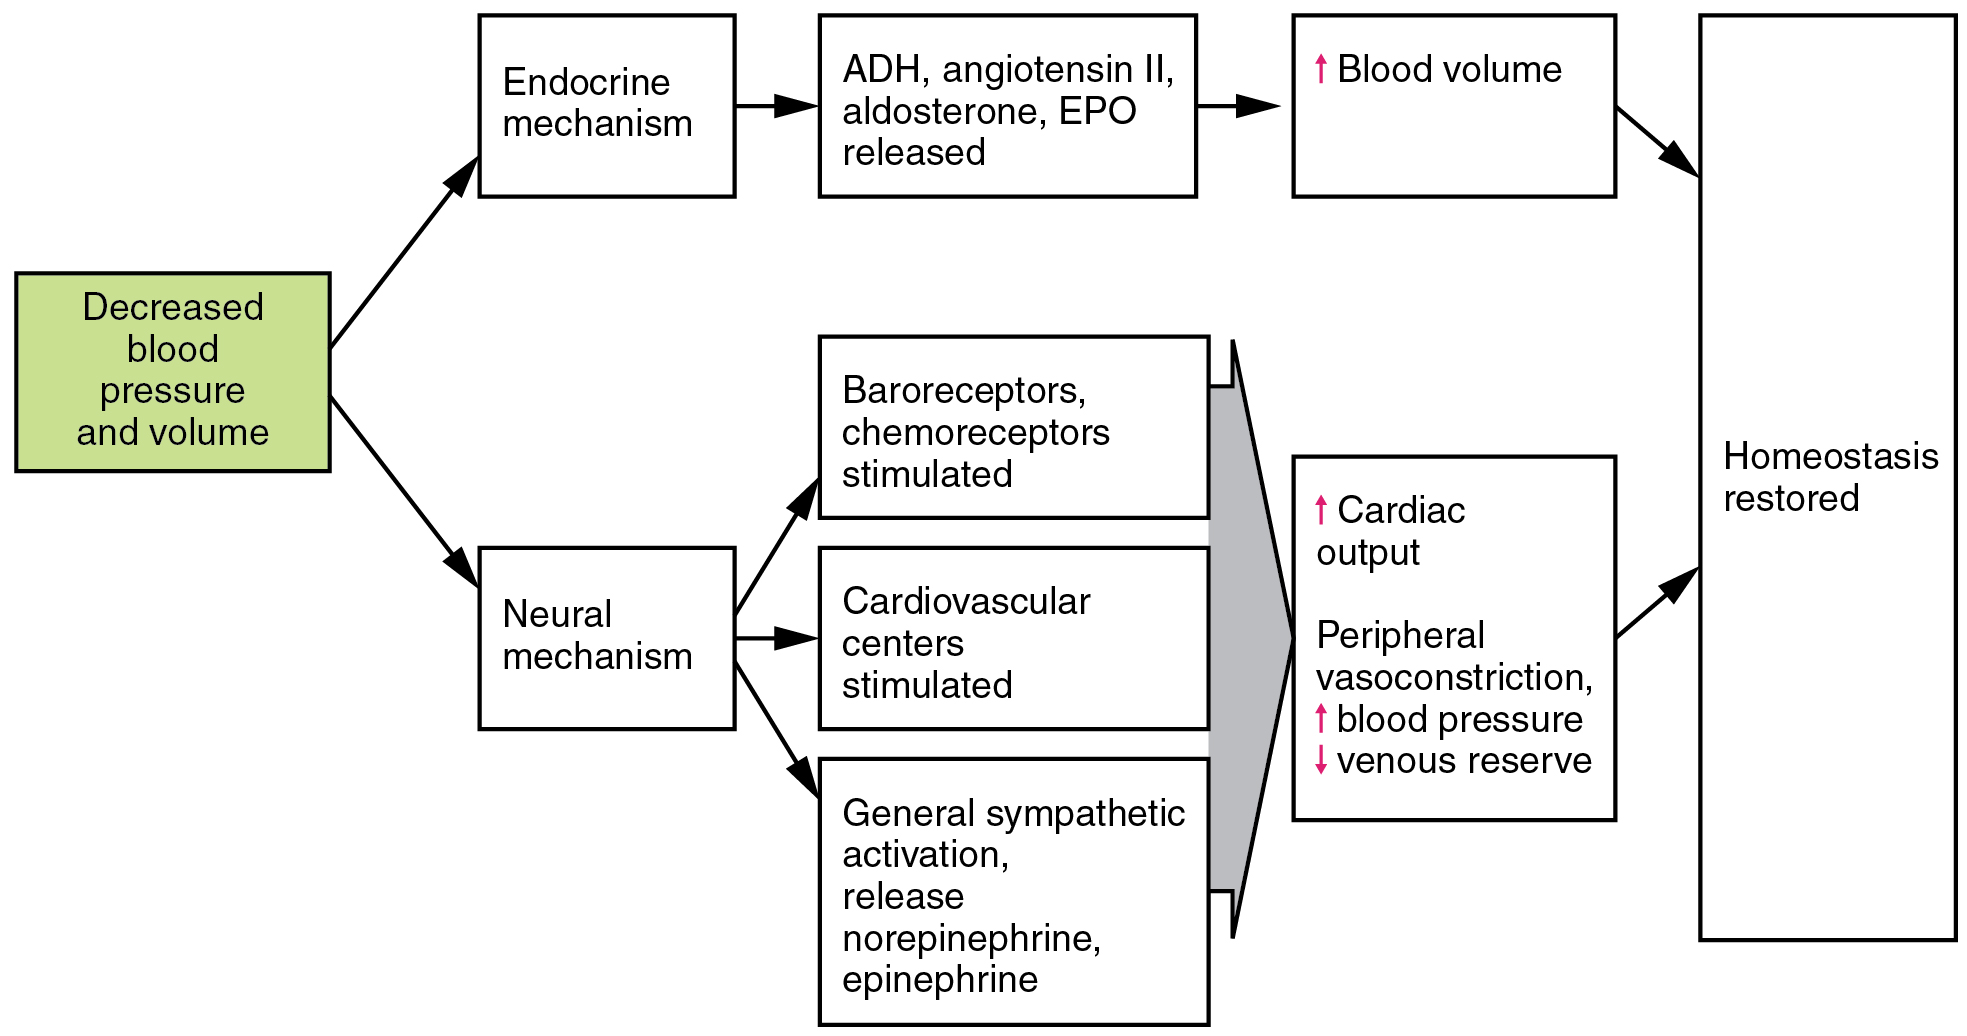 This flowchart shows the action of decreased blood pressure and volume in the neural and endocrine mechanisms.